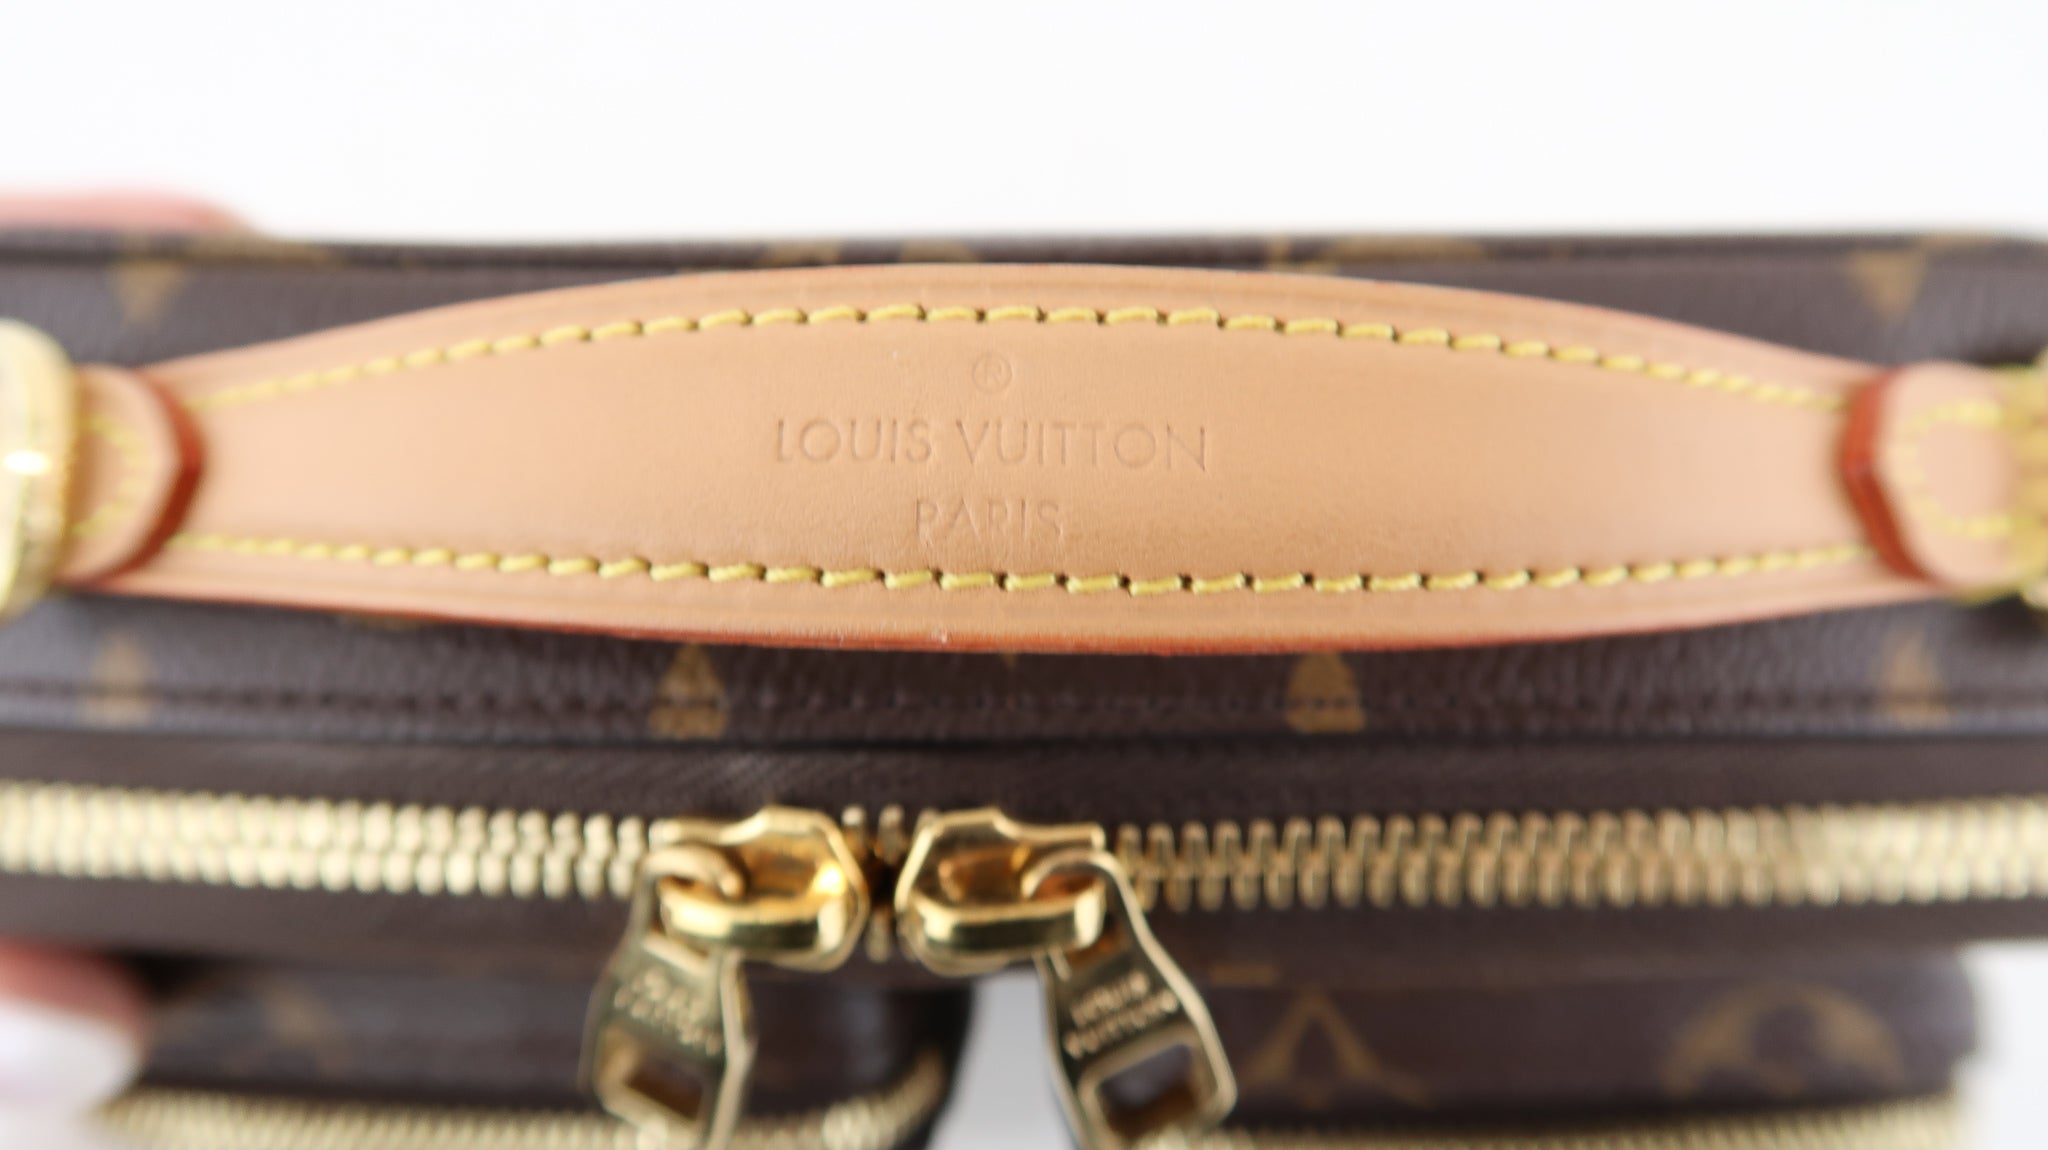 How to turn your LV wallet into a crossbody ☺️💕 #louisvuitton #lv #lo